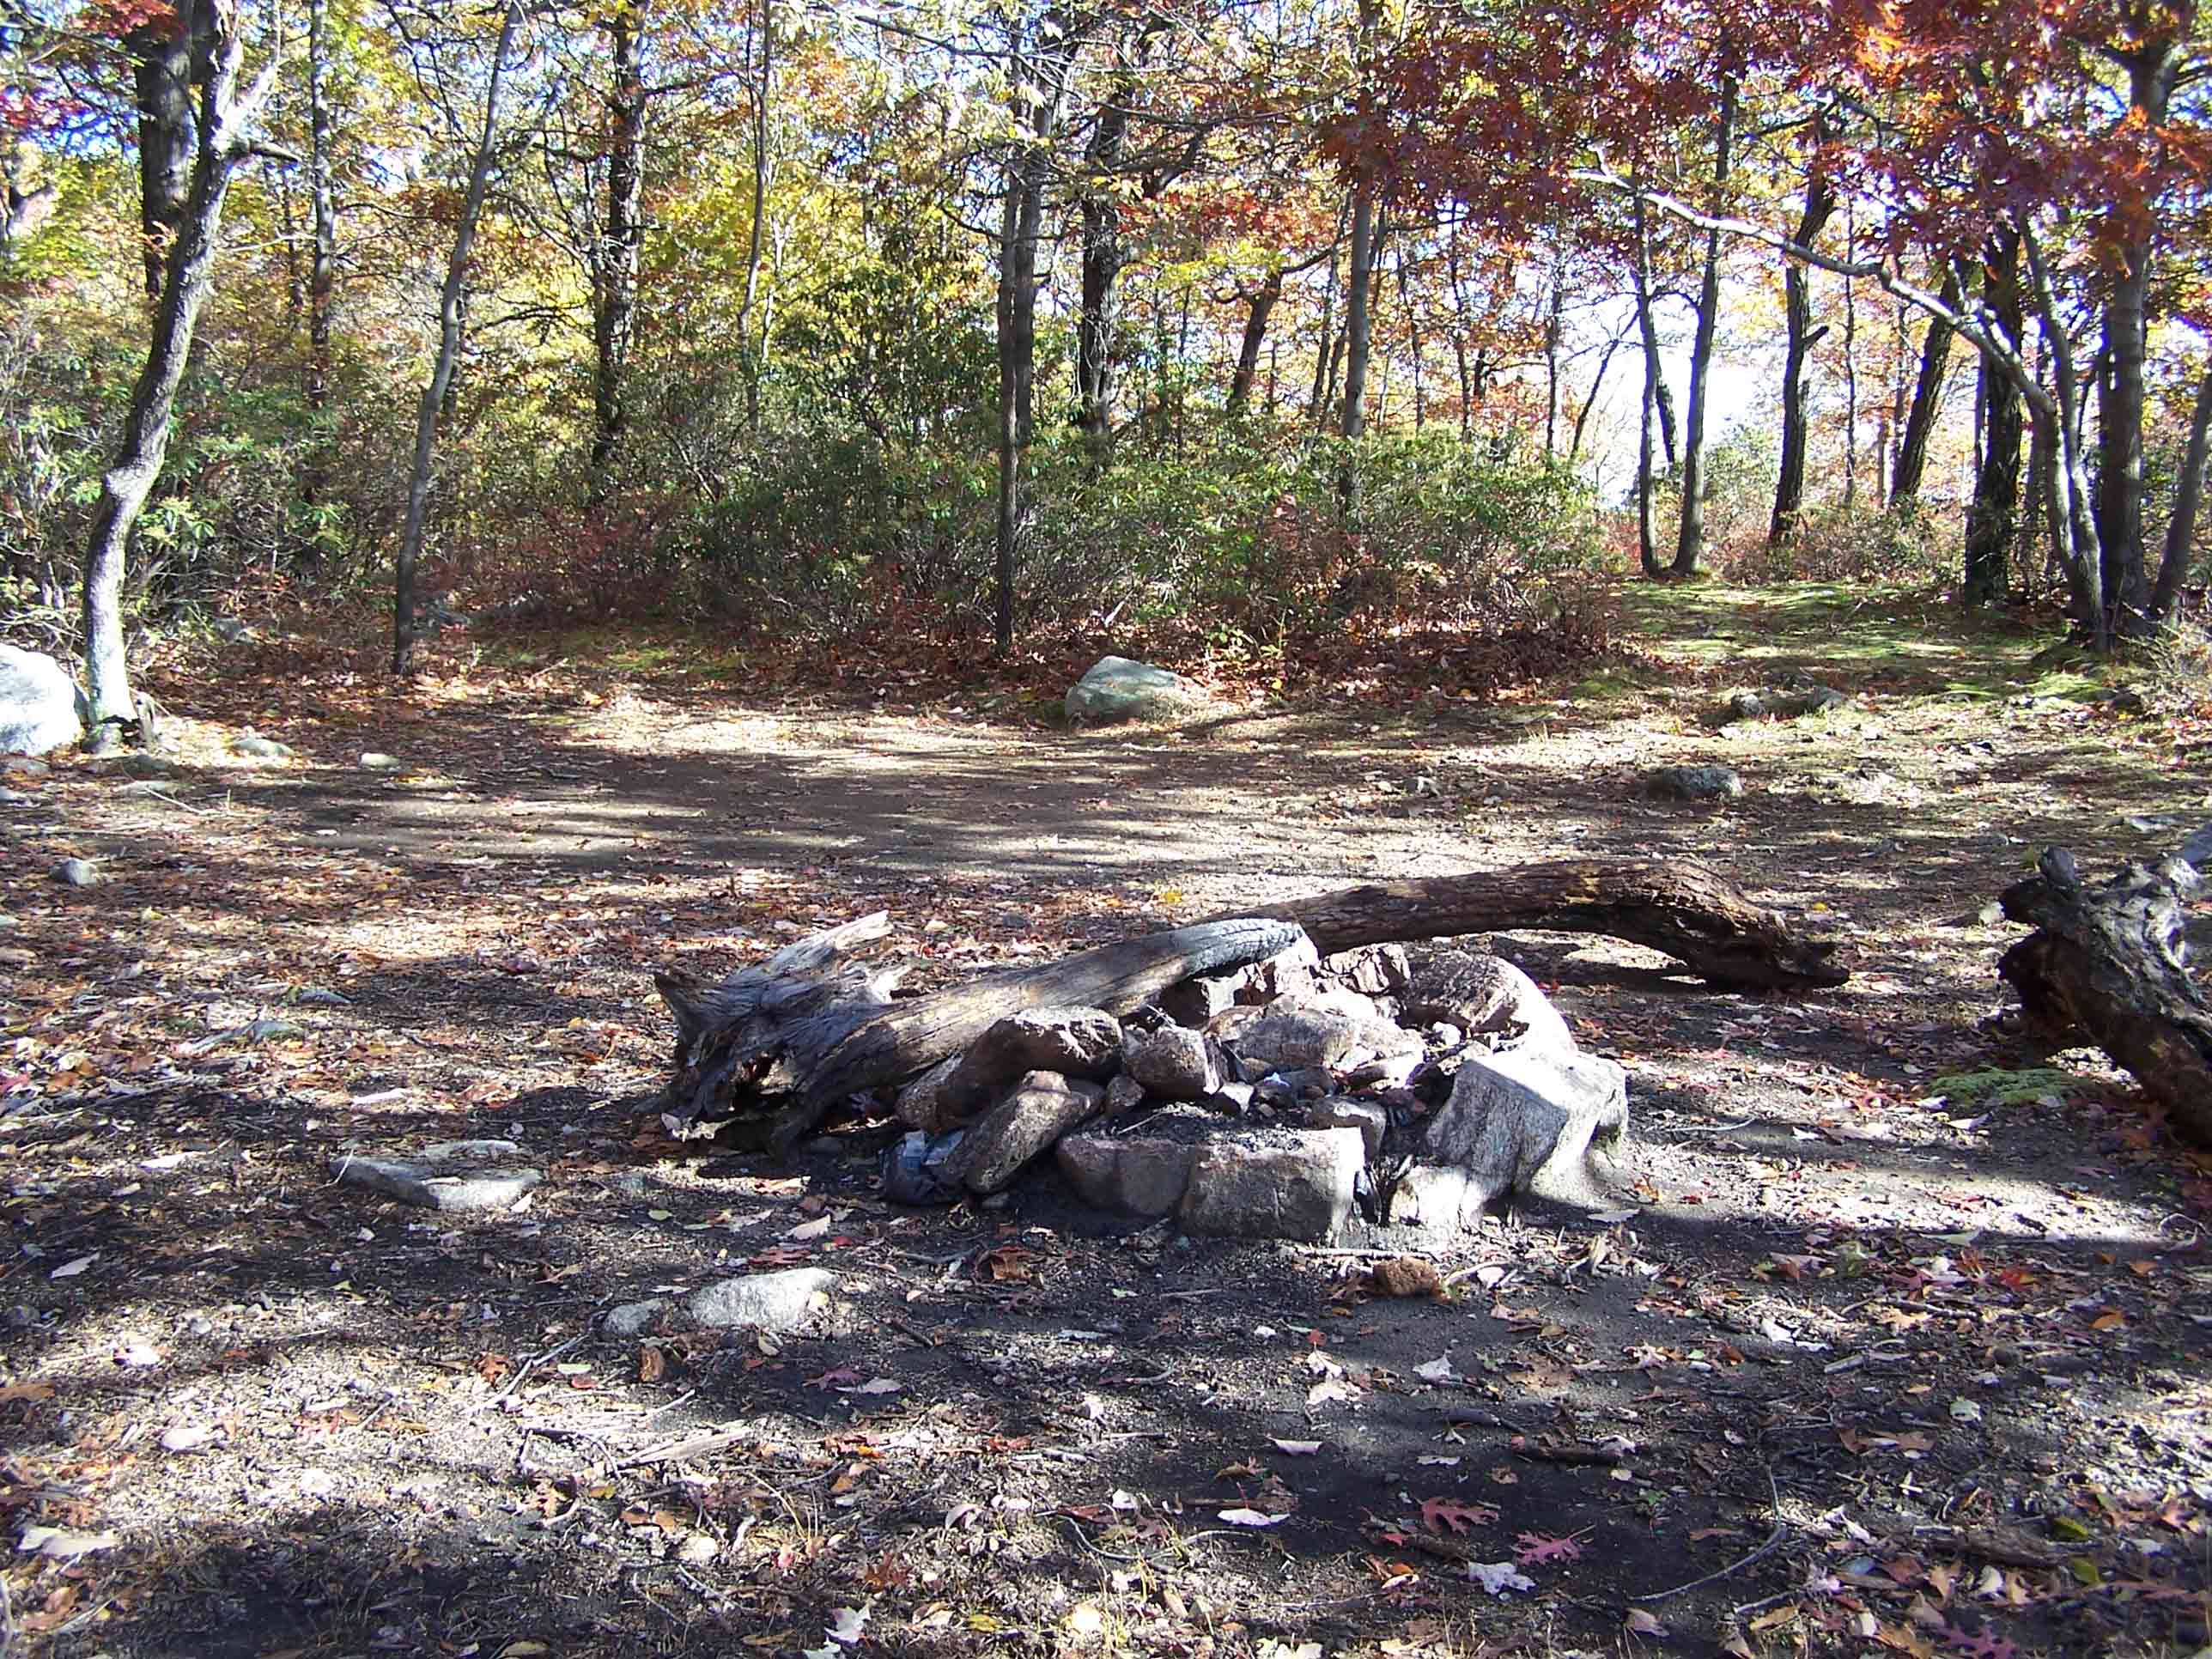 mm 6.8 Campsite on blue blaze trail near West Mountain shelter. Courtesy at@rohland.org